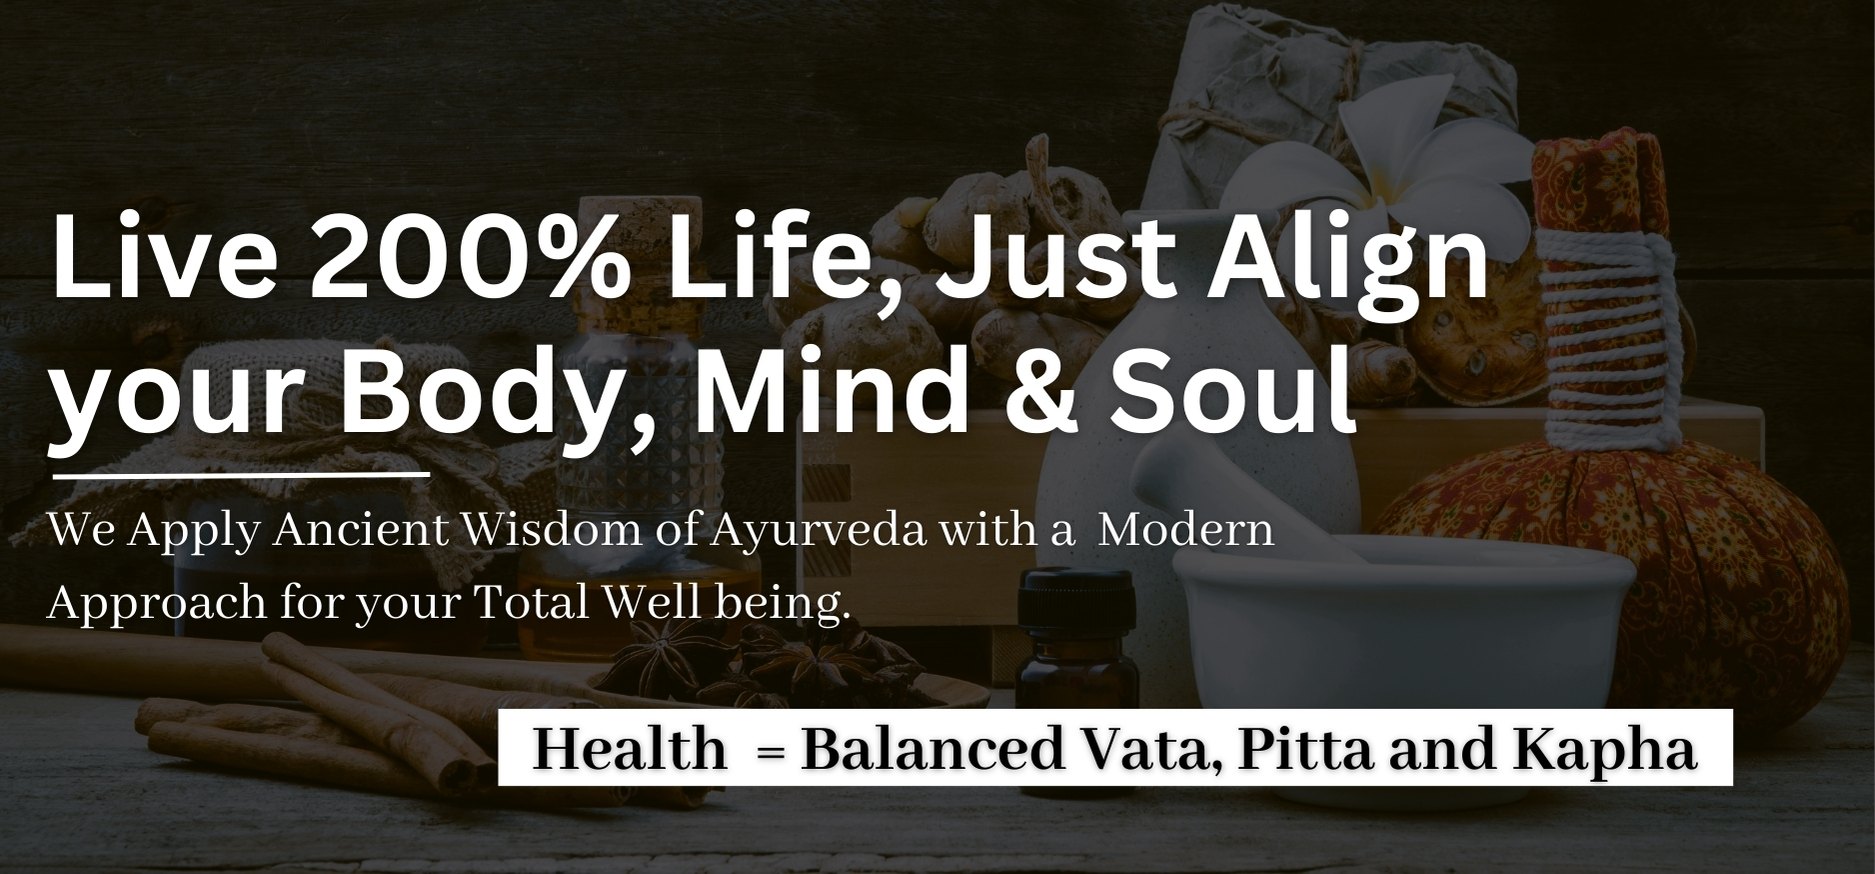 one of the best Ayurveda Hospital